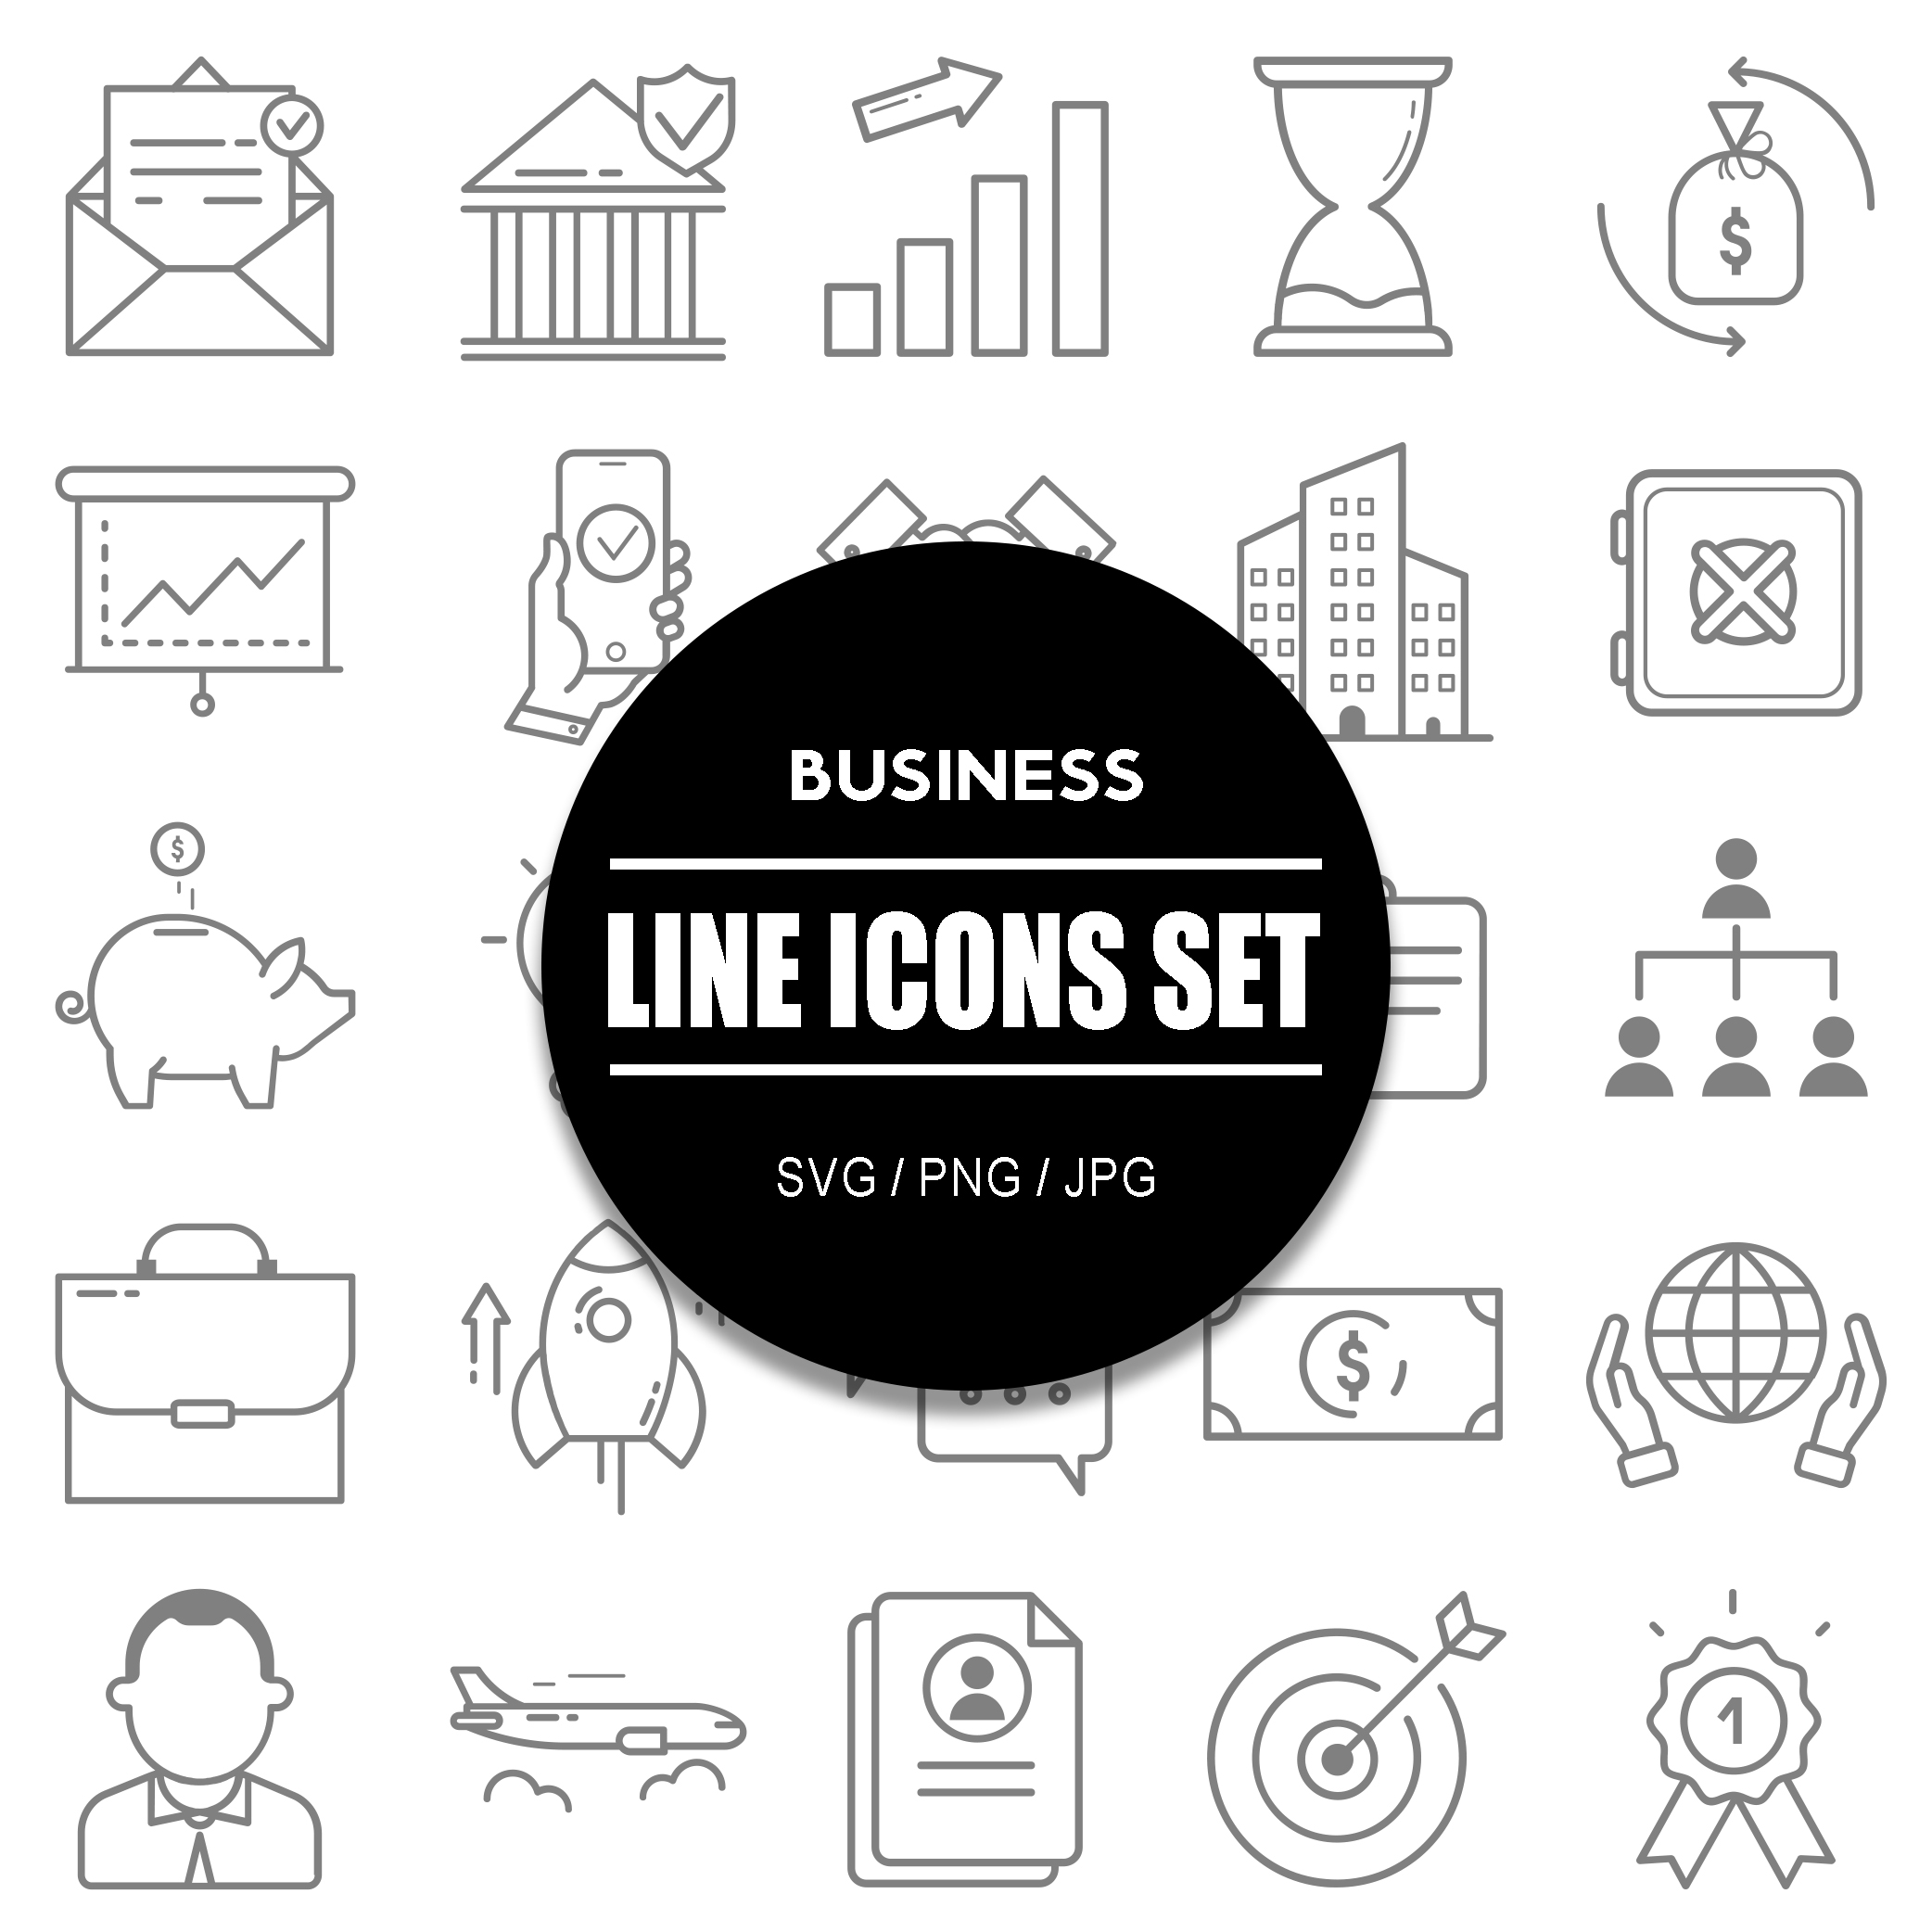 Business Line Icon Set cover image.